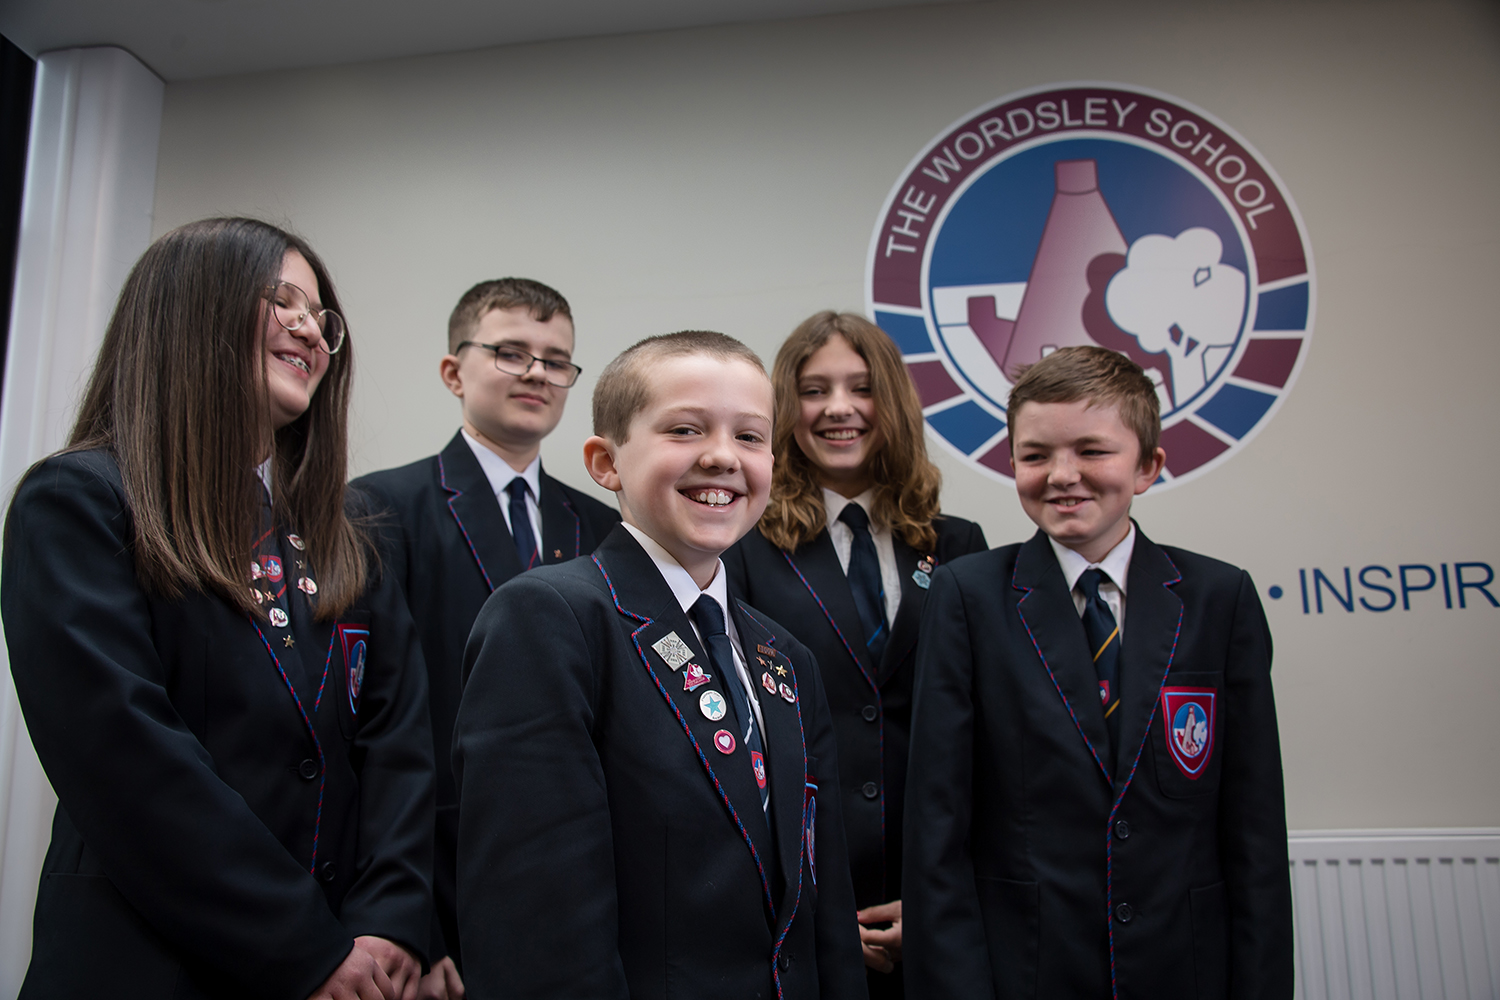 Five students in uniform standing in front of The Wordsley Logo on the wall, smiling into the distance